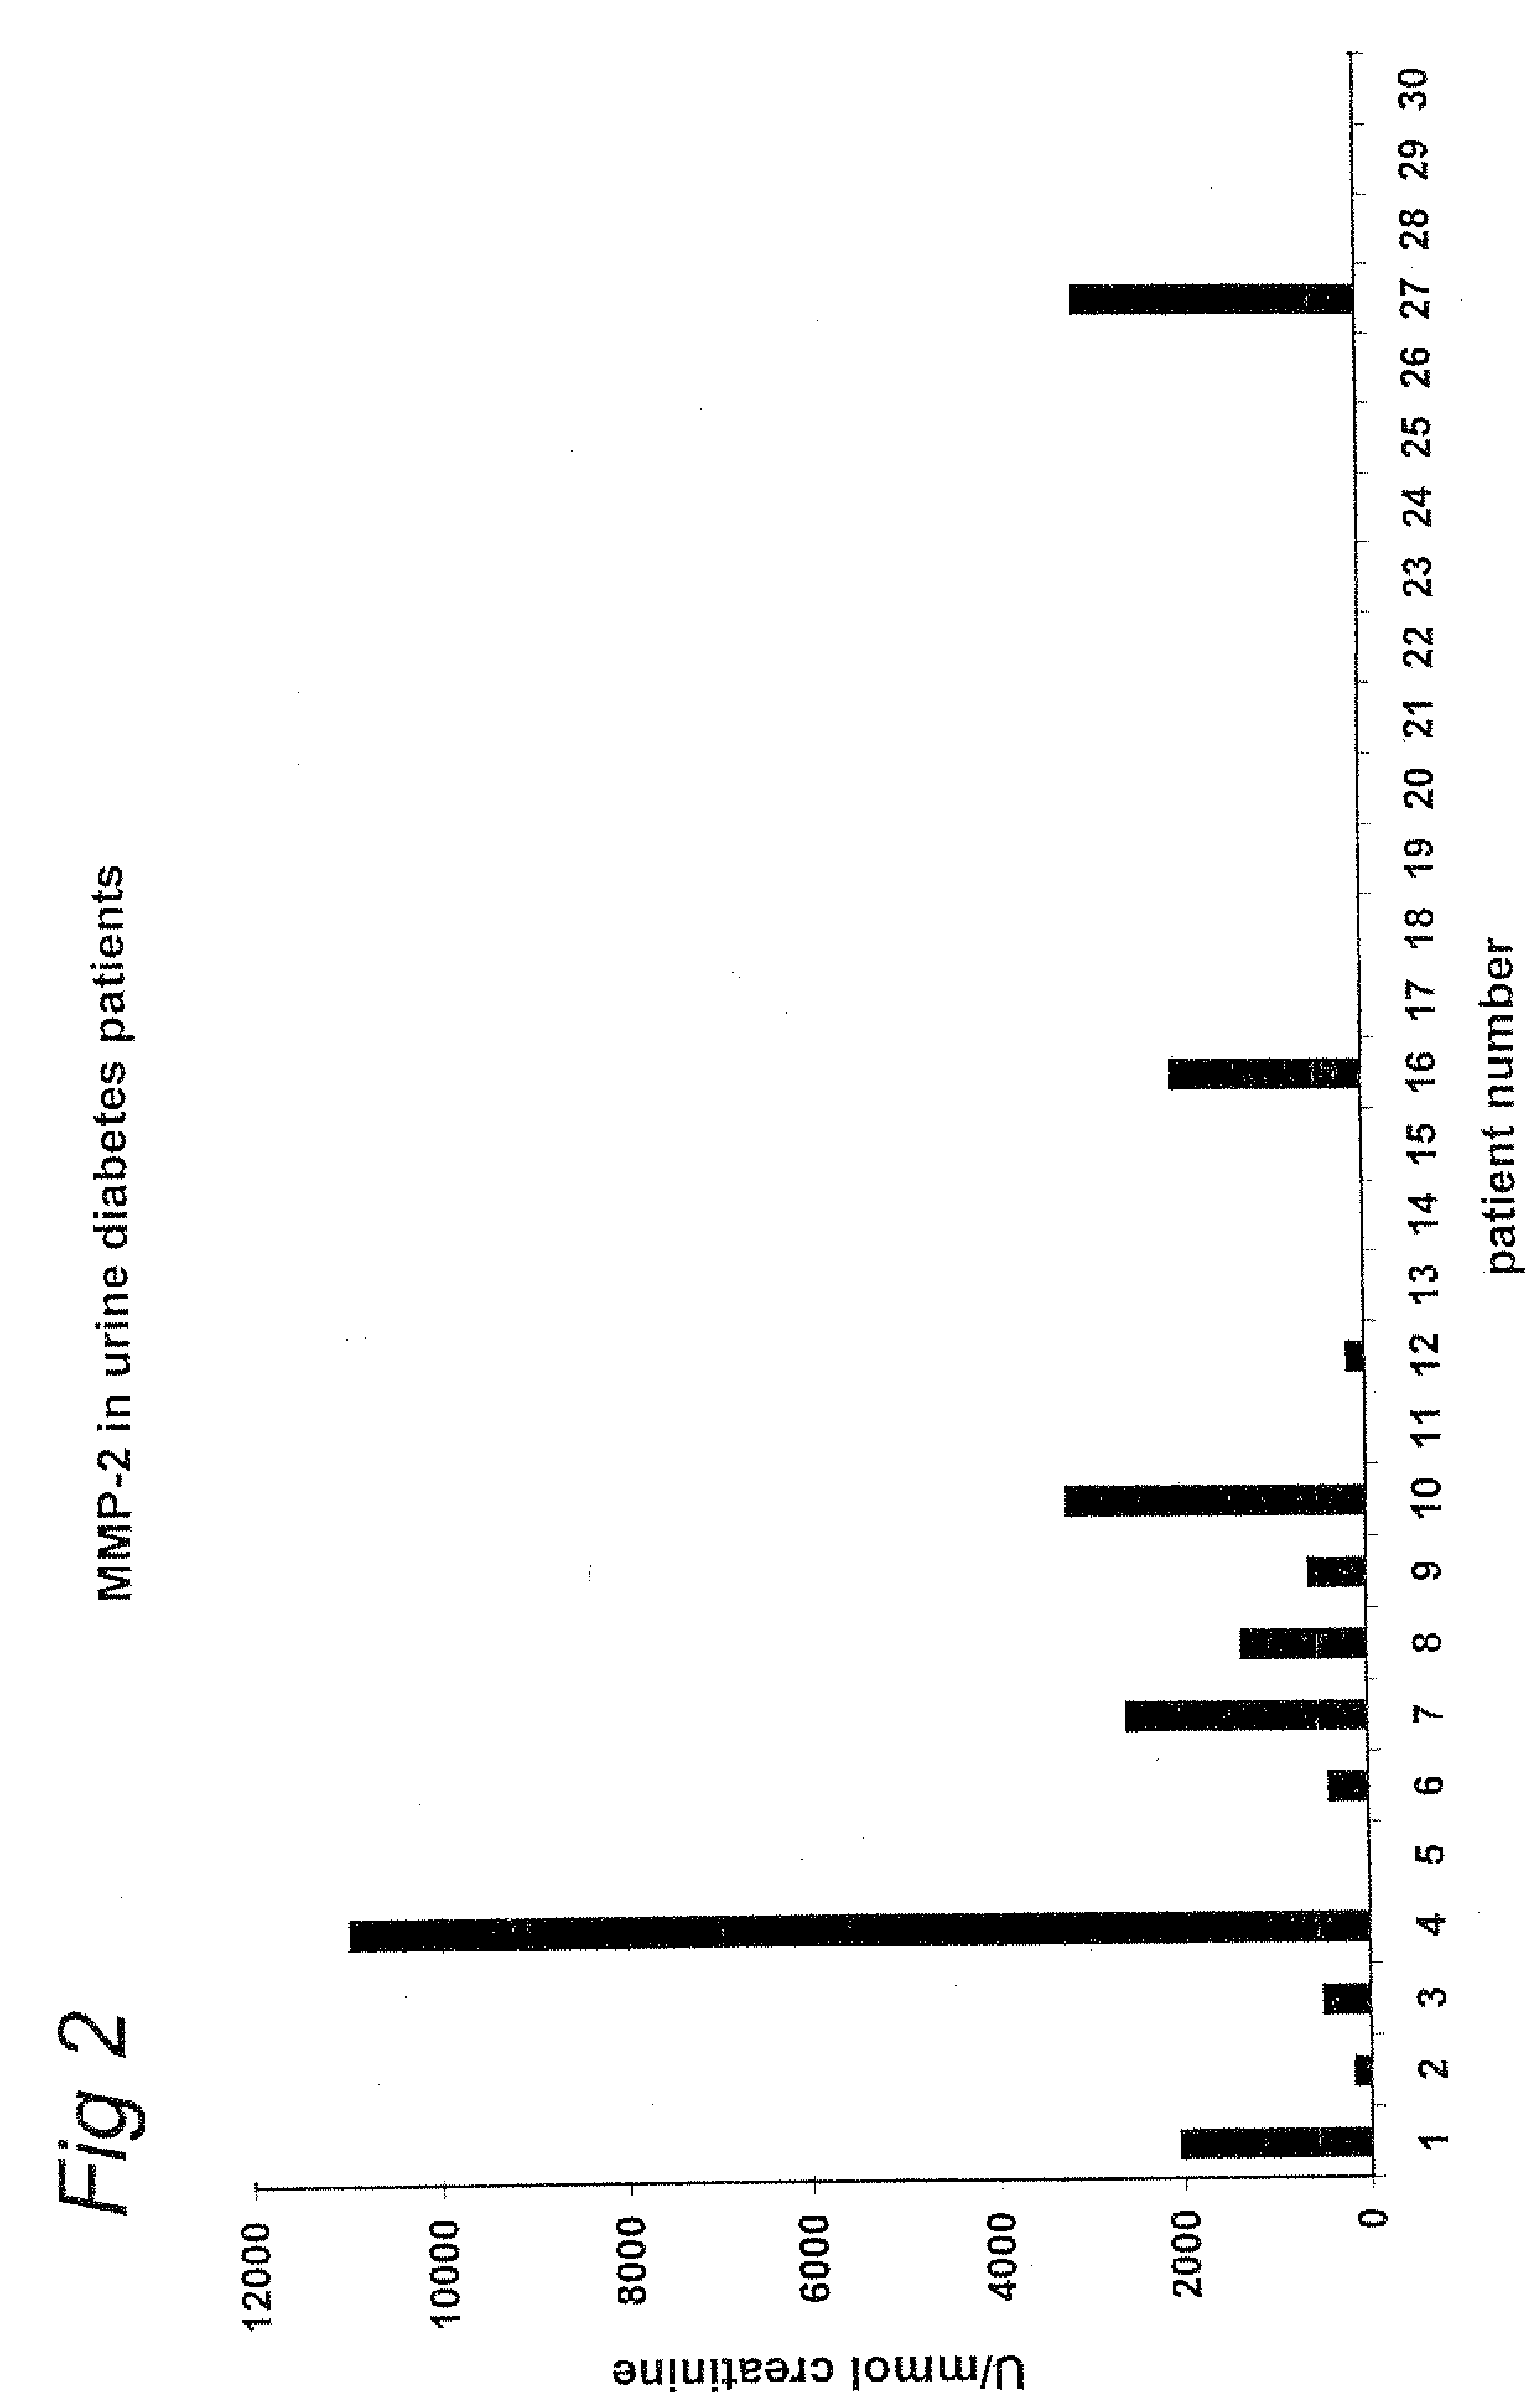 Proteolytic enzymes in urine as diagnostic parameters in diseases involving matrix remodelling